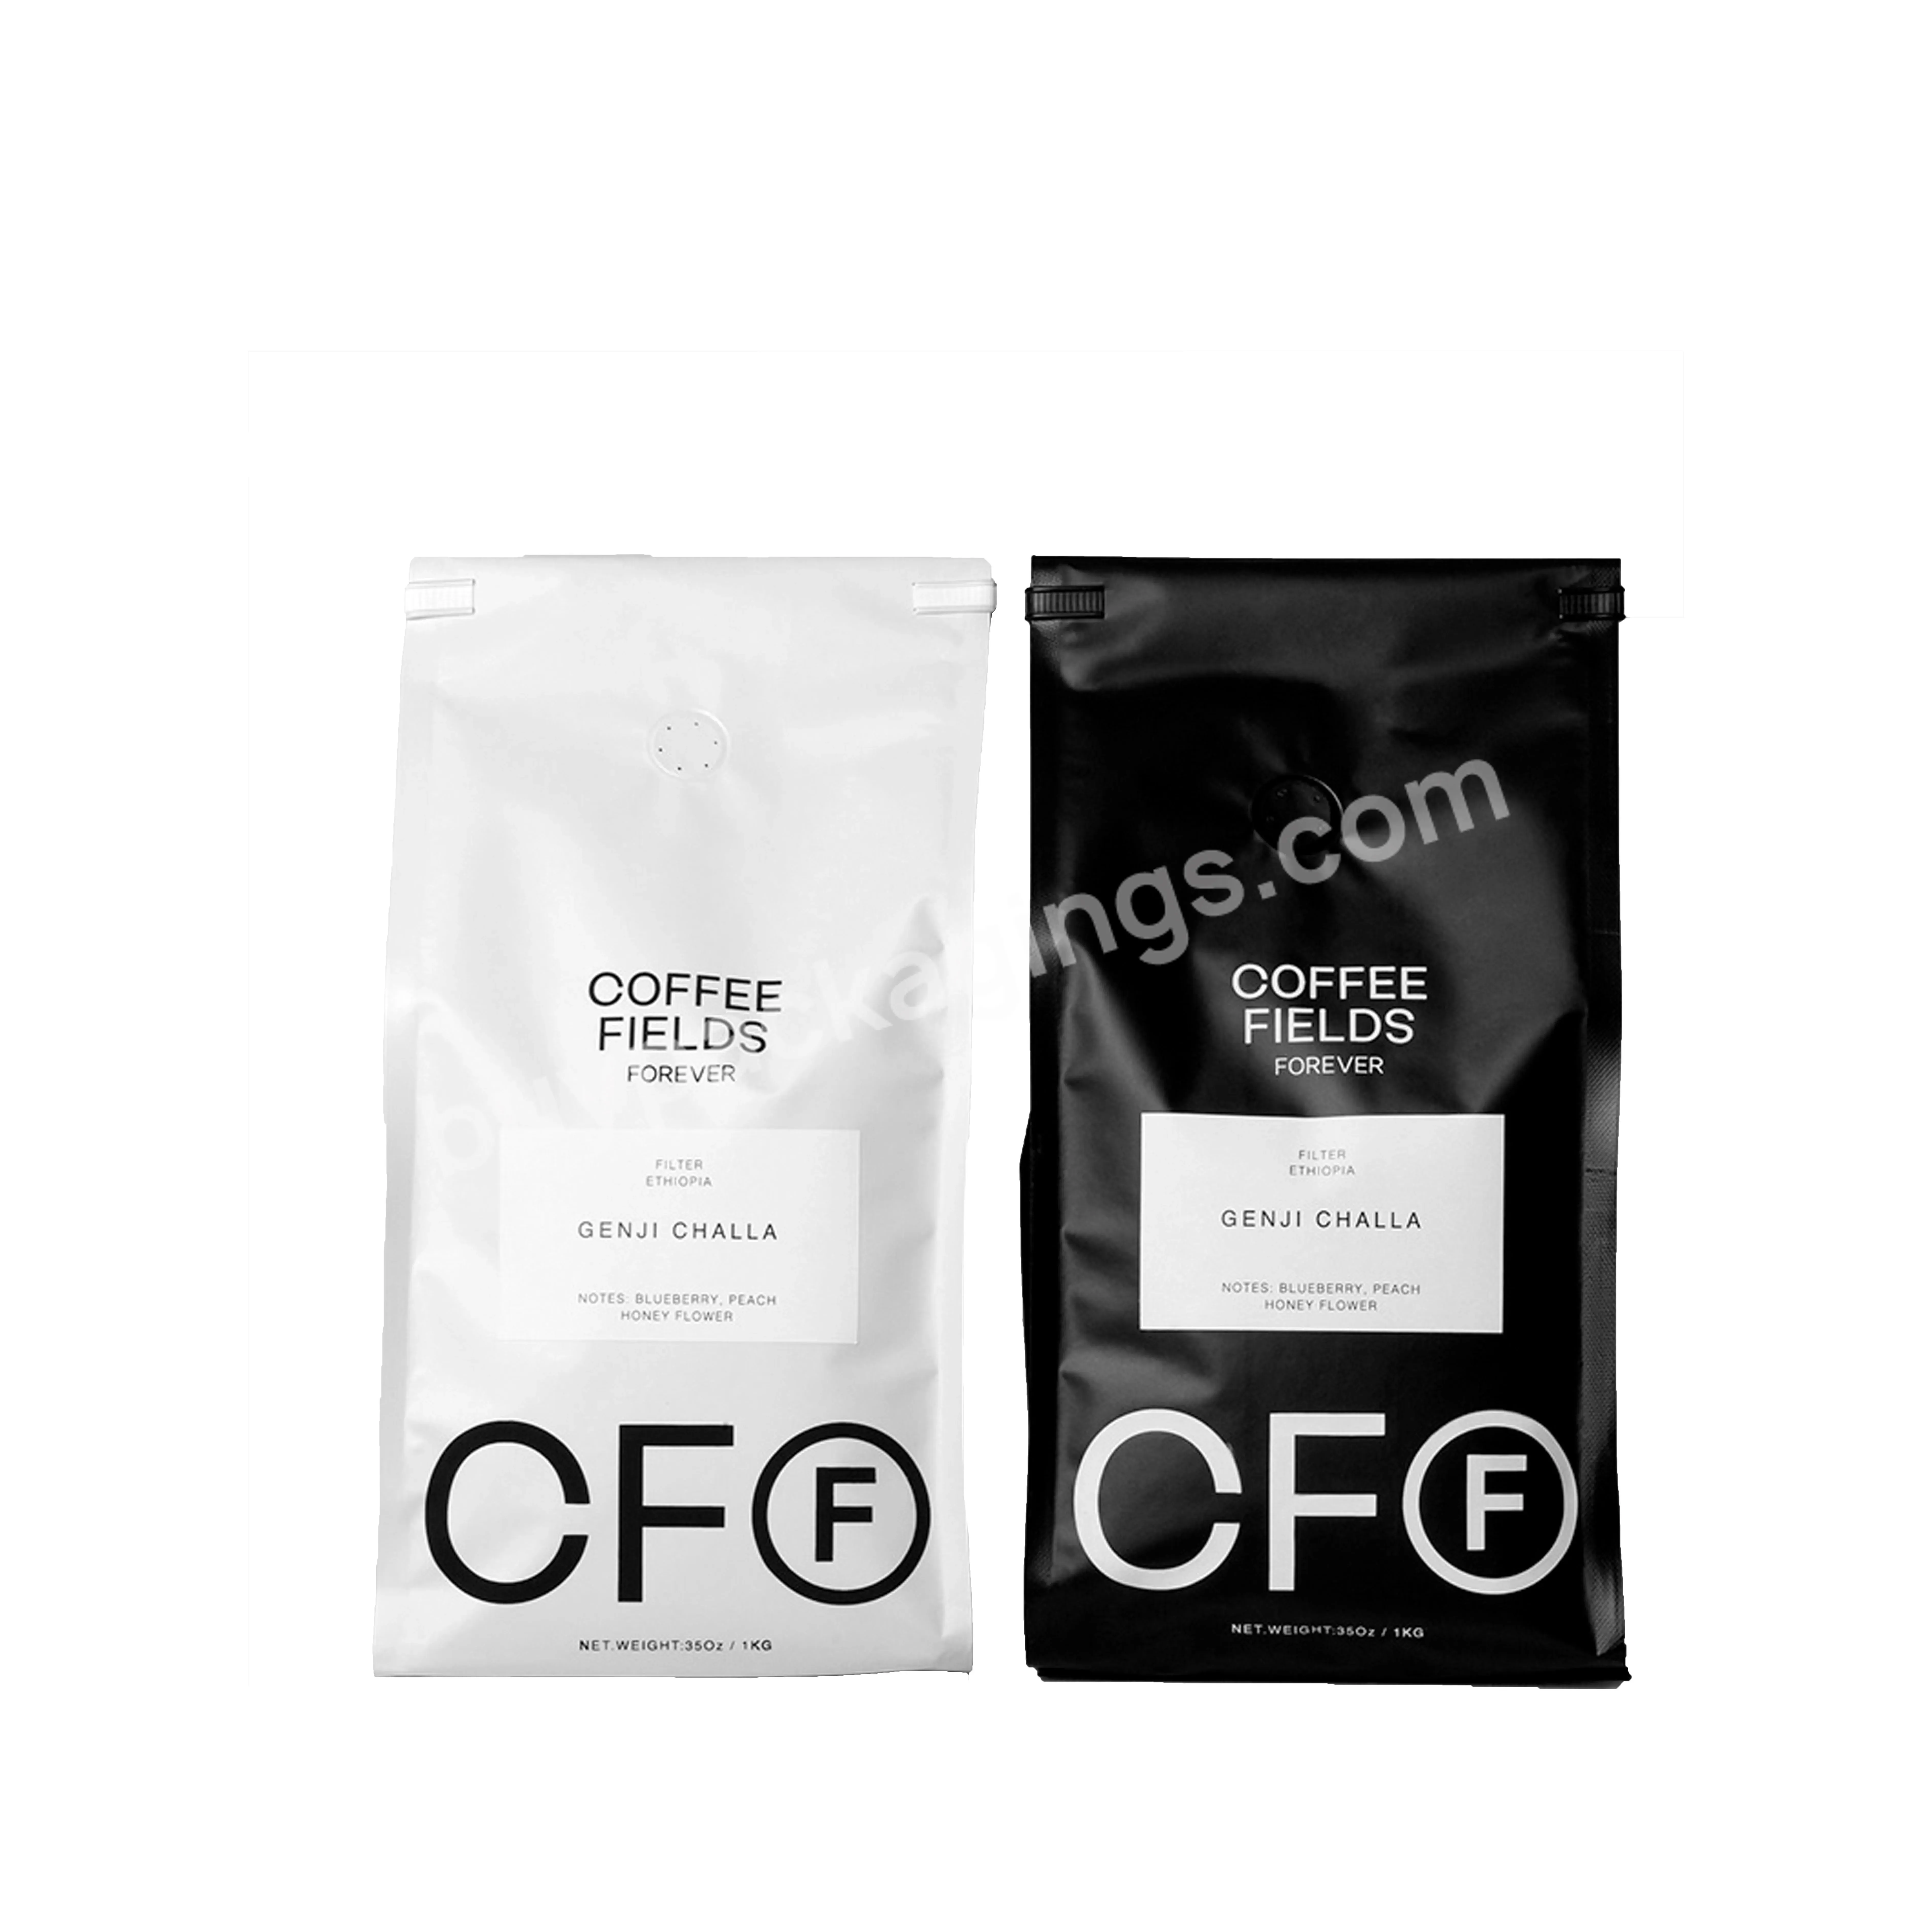 Low Moq Food Grade Coffee Pouches Custom Print Aluminum Foil Flat Bottom Packaging Pouch For Coffee Bags Branded Coffee Pouch - Buy Coffee Pouches Custom Print,Packaging Pouch For Coffee,Branded Coffee Pouch.